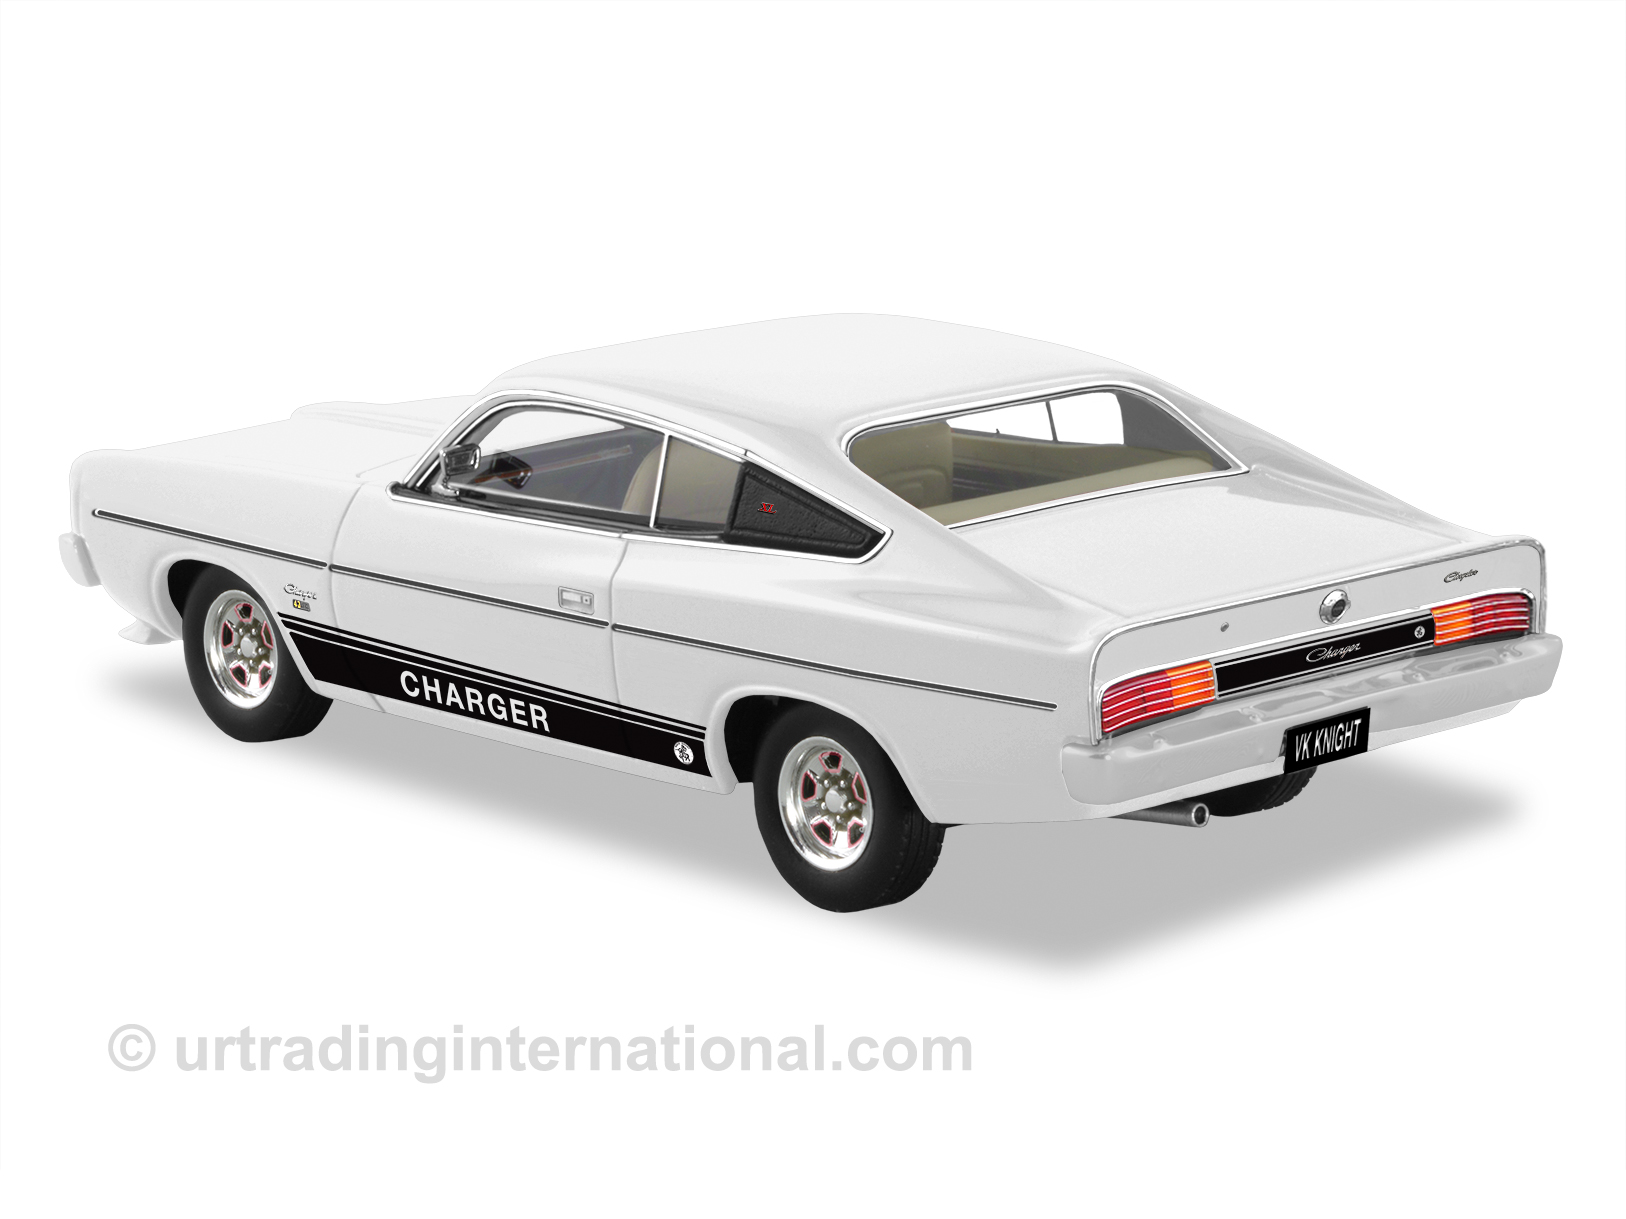 1976 VK Chrysler Charger ‘White Knight Special’ – Arctic White